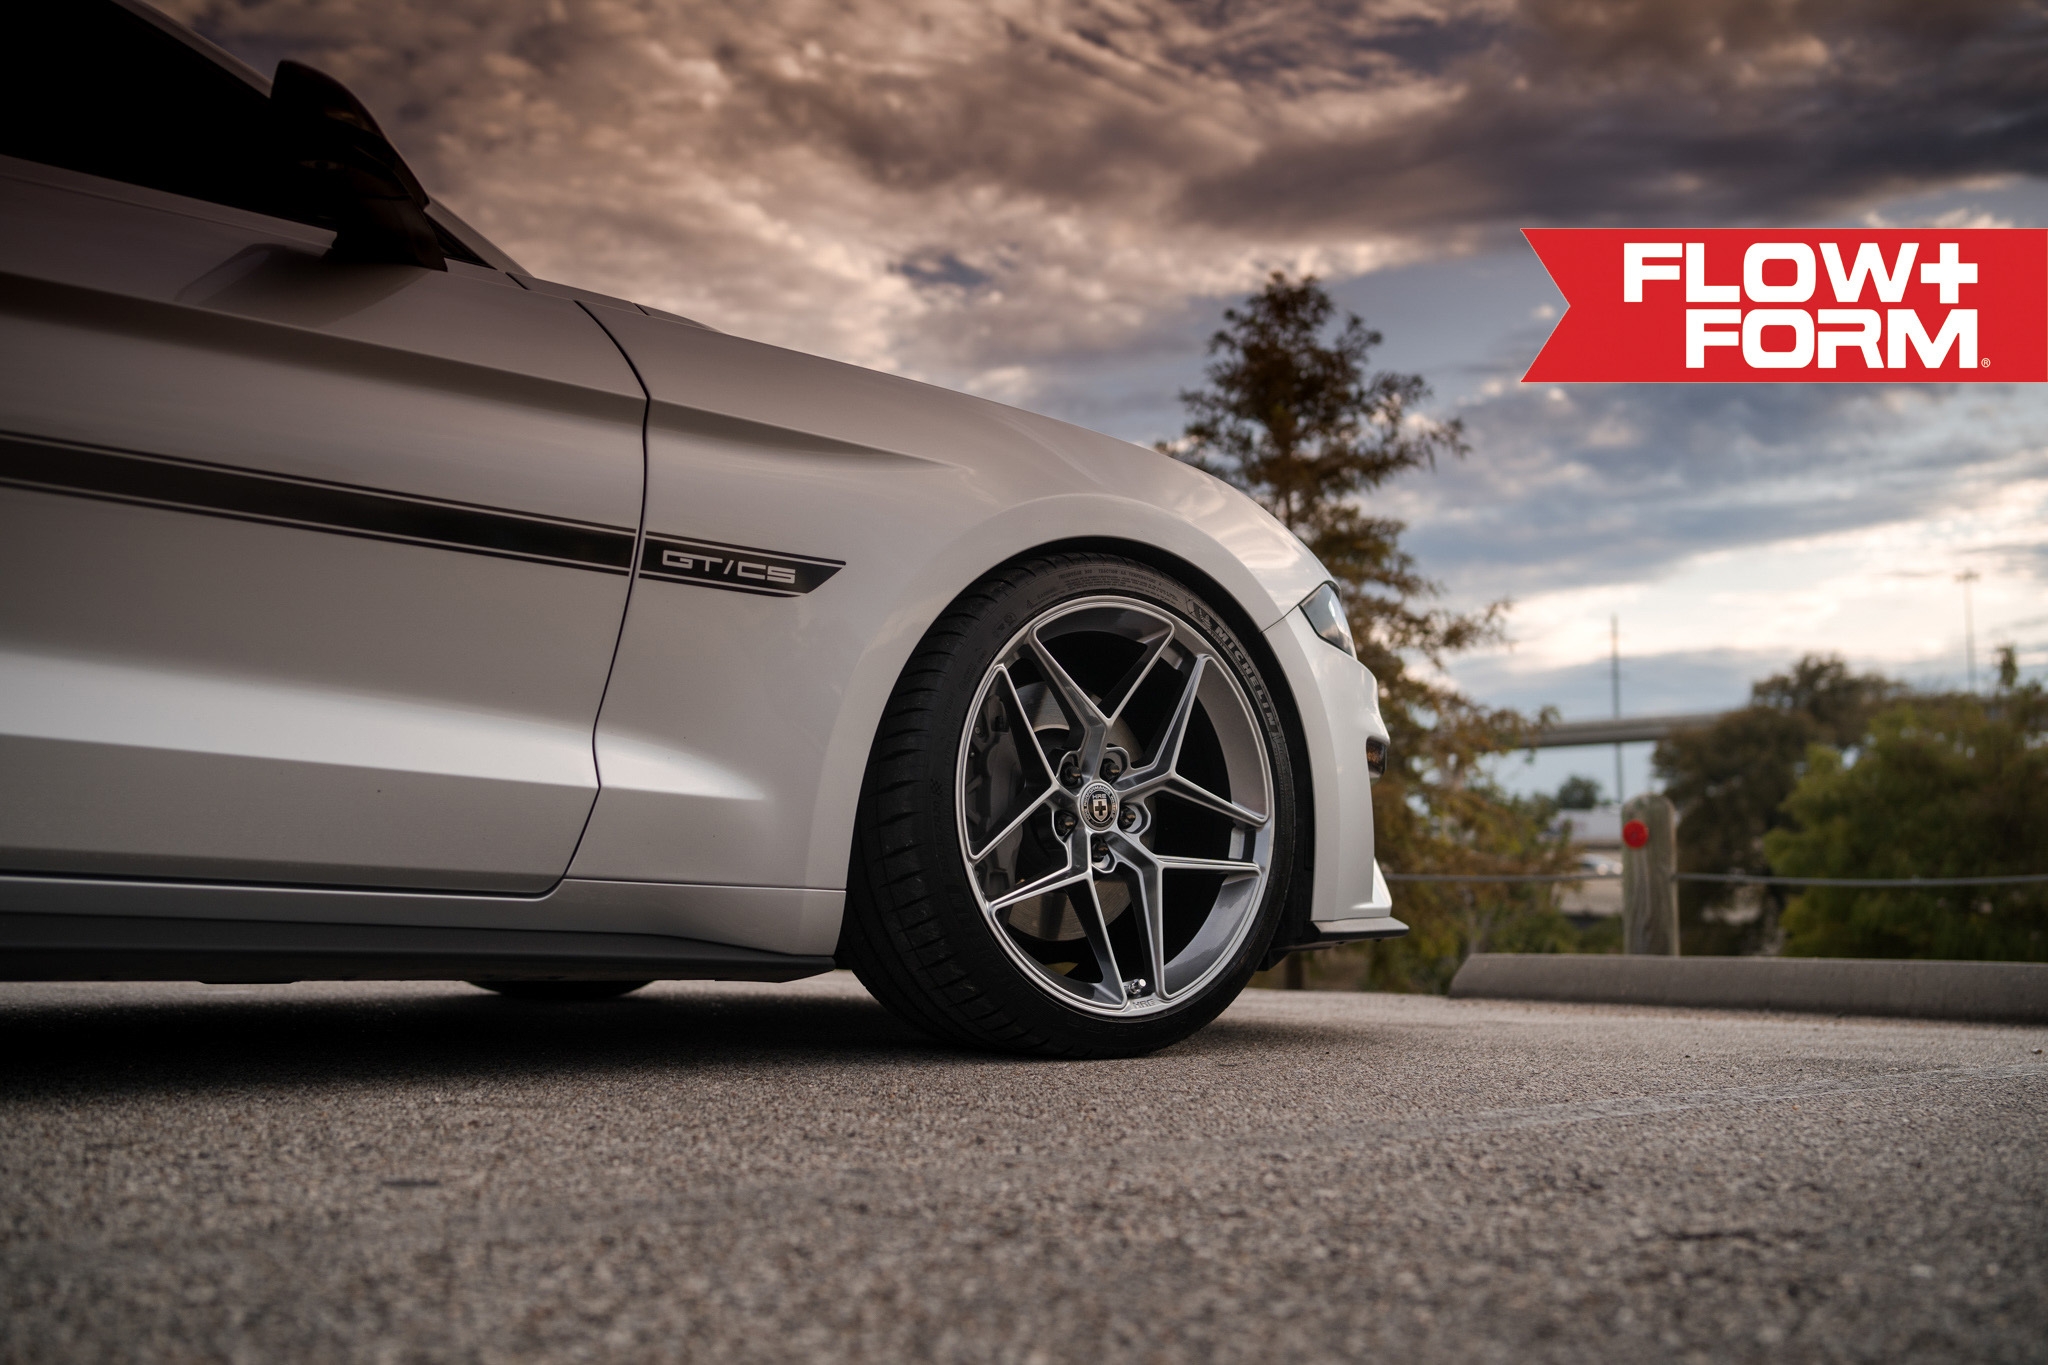 S650 Mustang Authorized HRE Wheels Dealer: Flow Form and Forged Series Wheels For Mustang S650 5